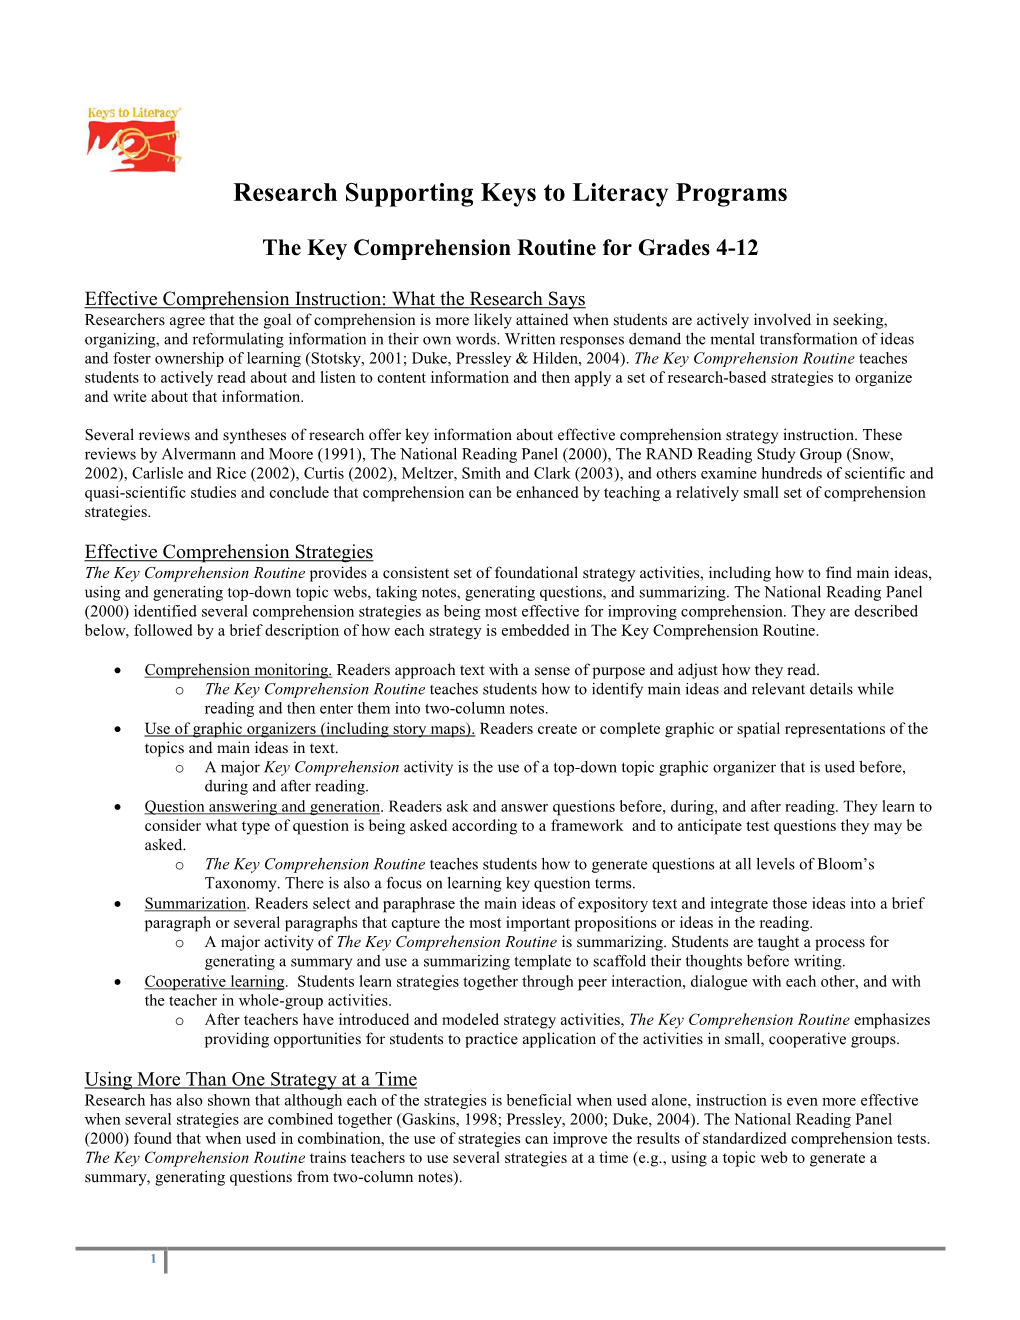 Research Supporting Keys to Literacy Programs